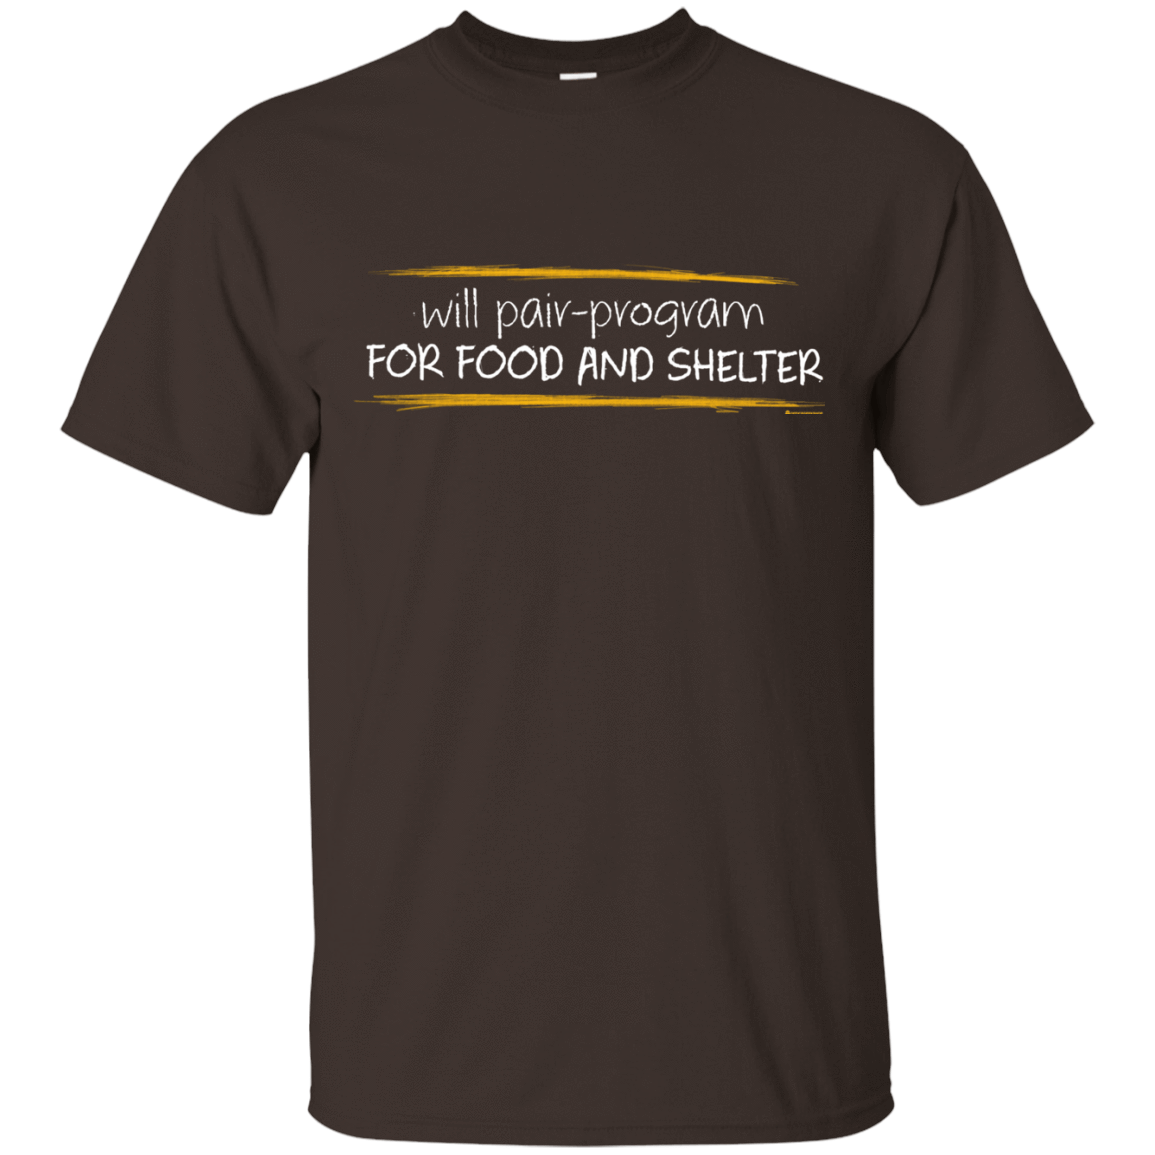 T-Shirts Dark Chocolate / Small Pair Programming For Food And Shelter T-Shirt